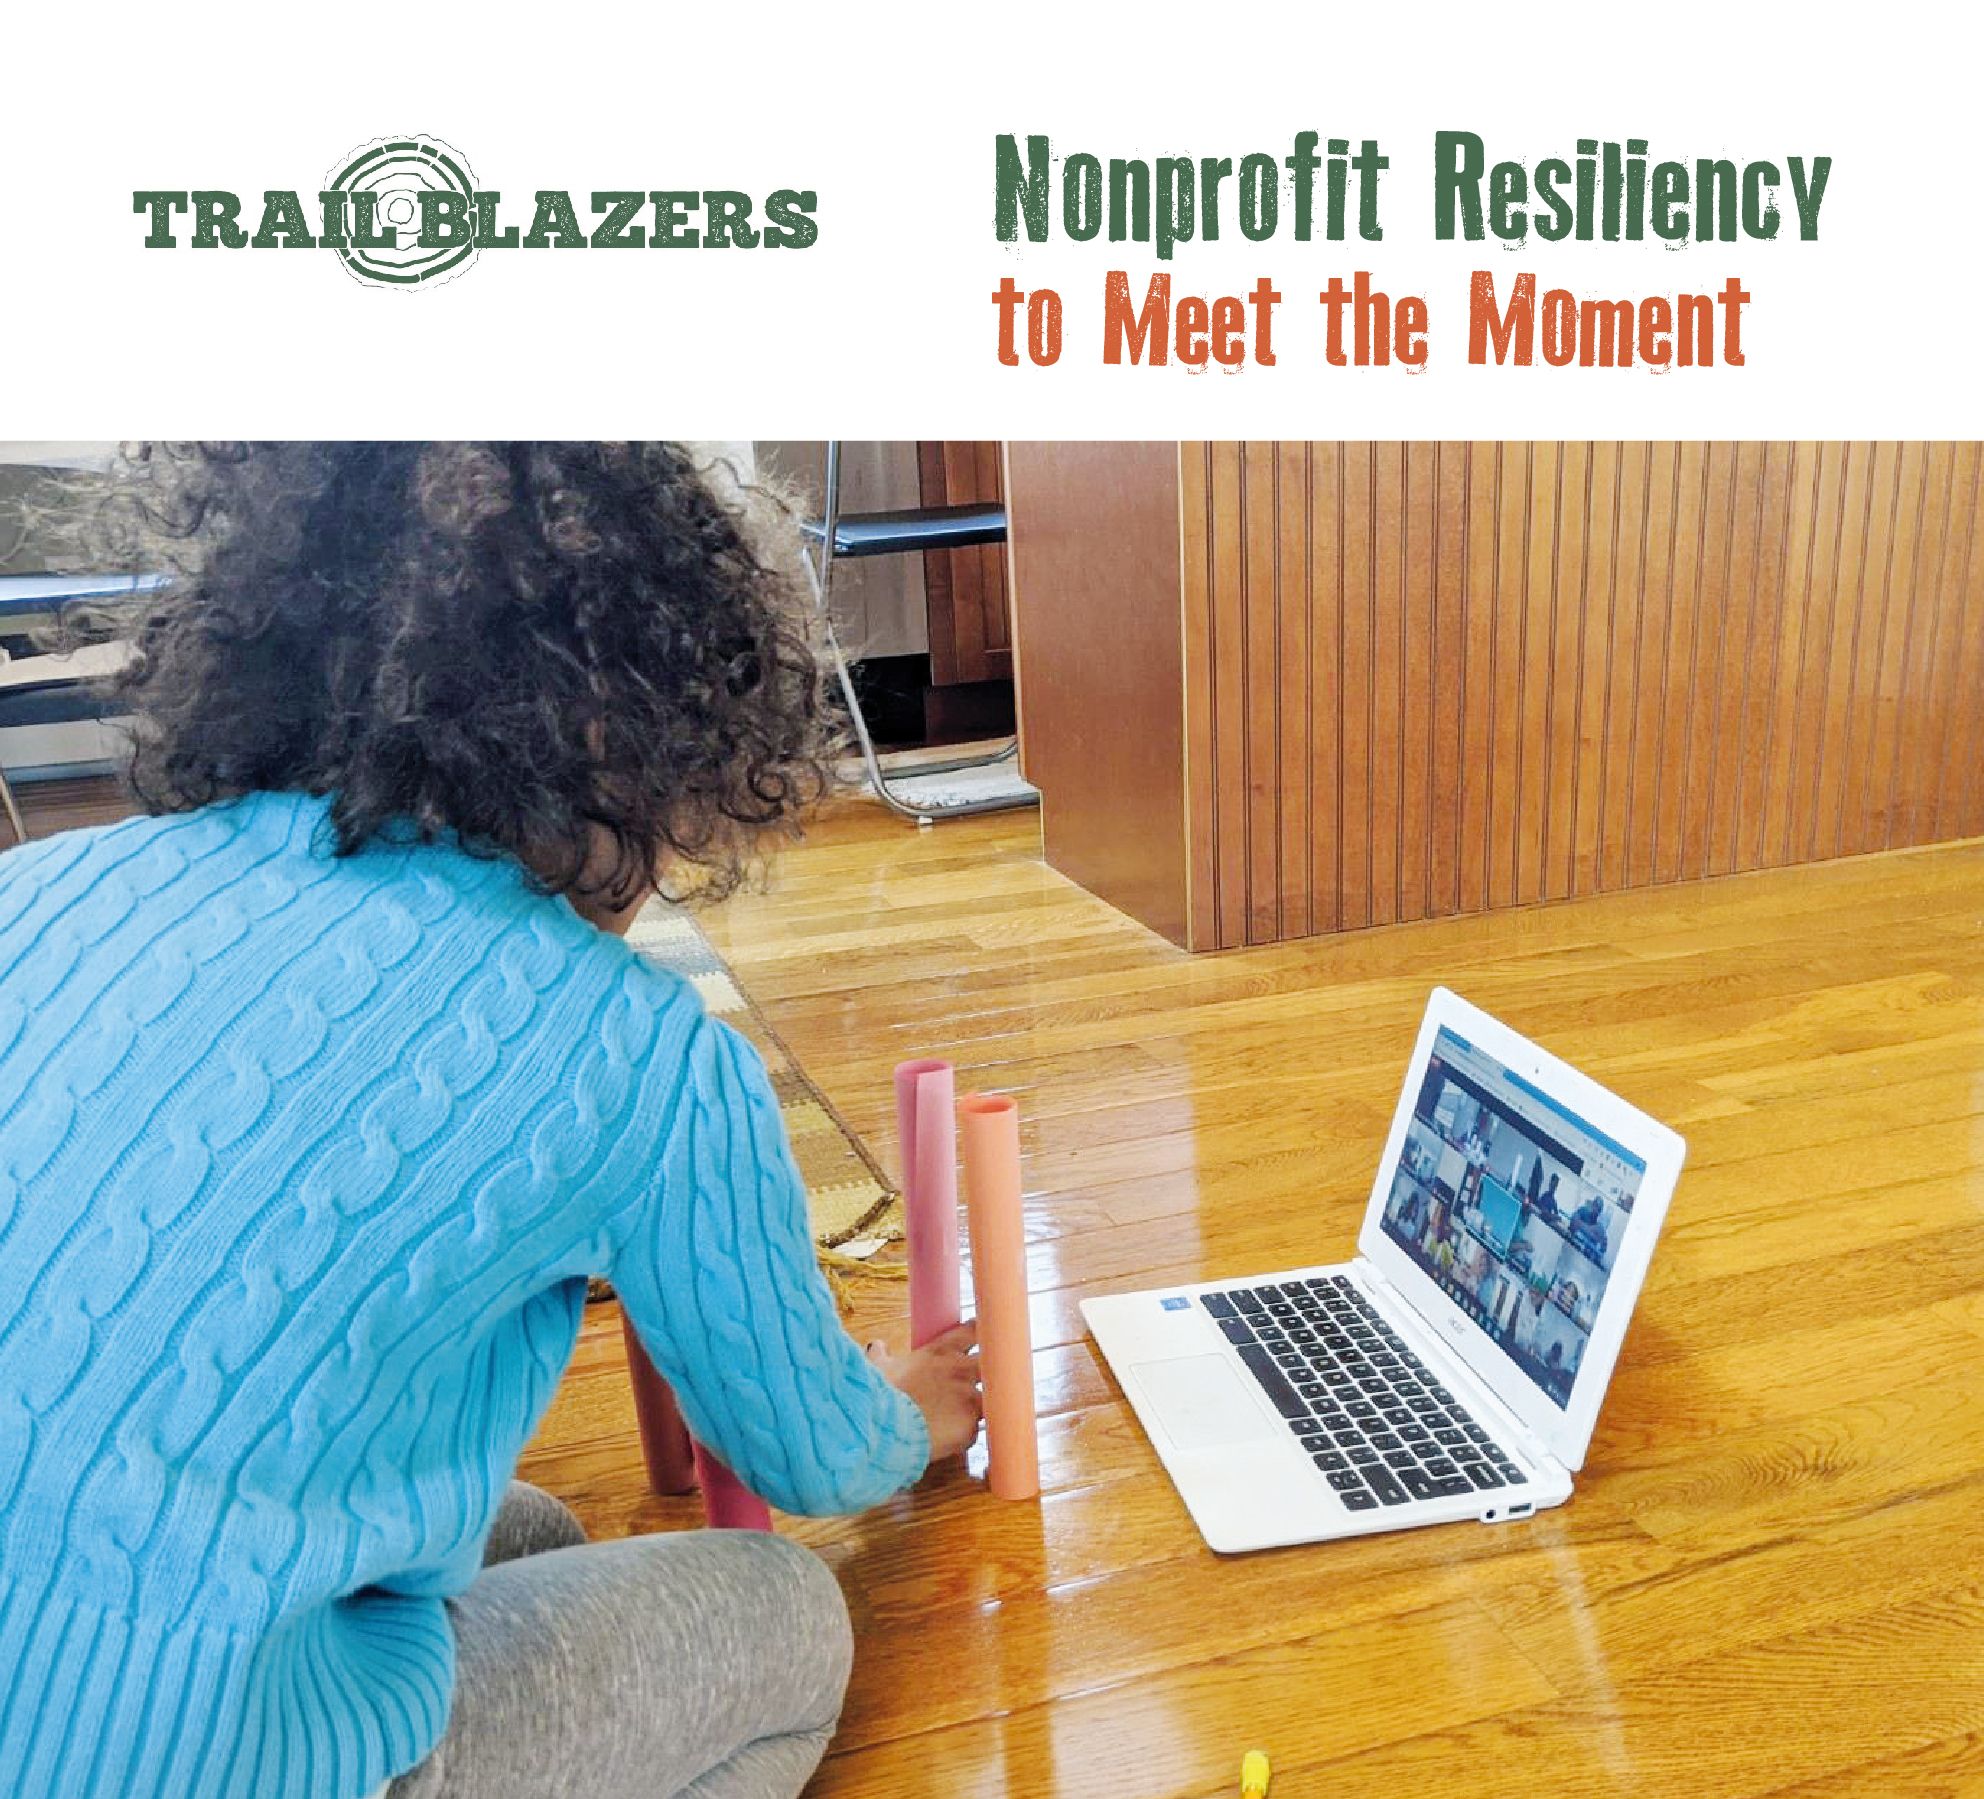 Nonprofit Resiliency to Meet the Moment - Trail Blazers